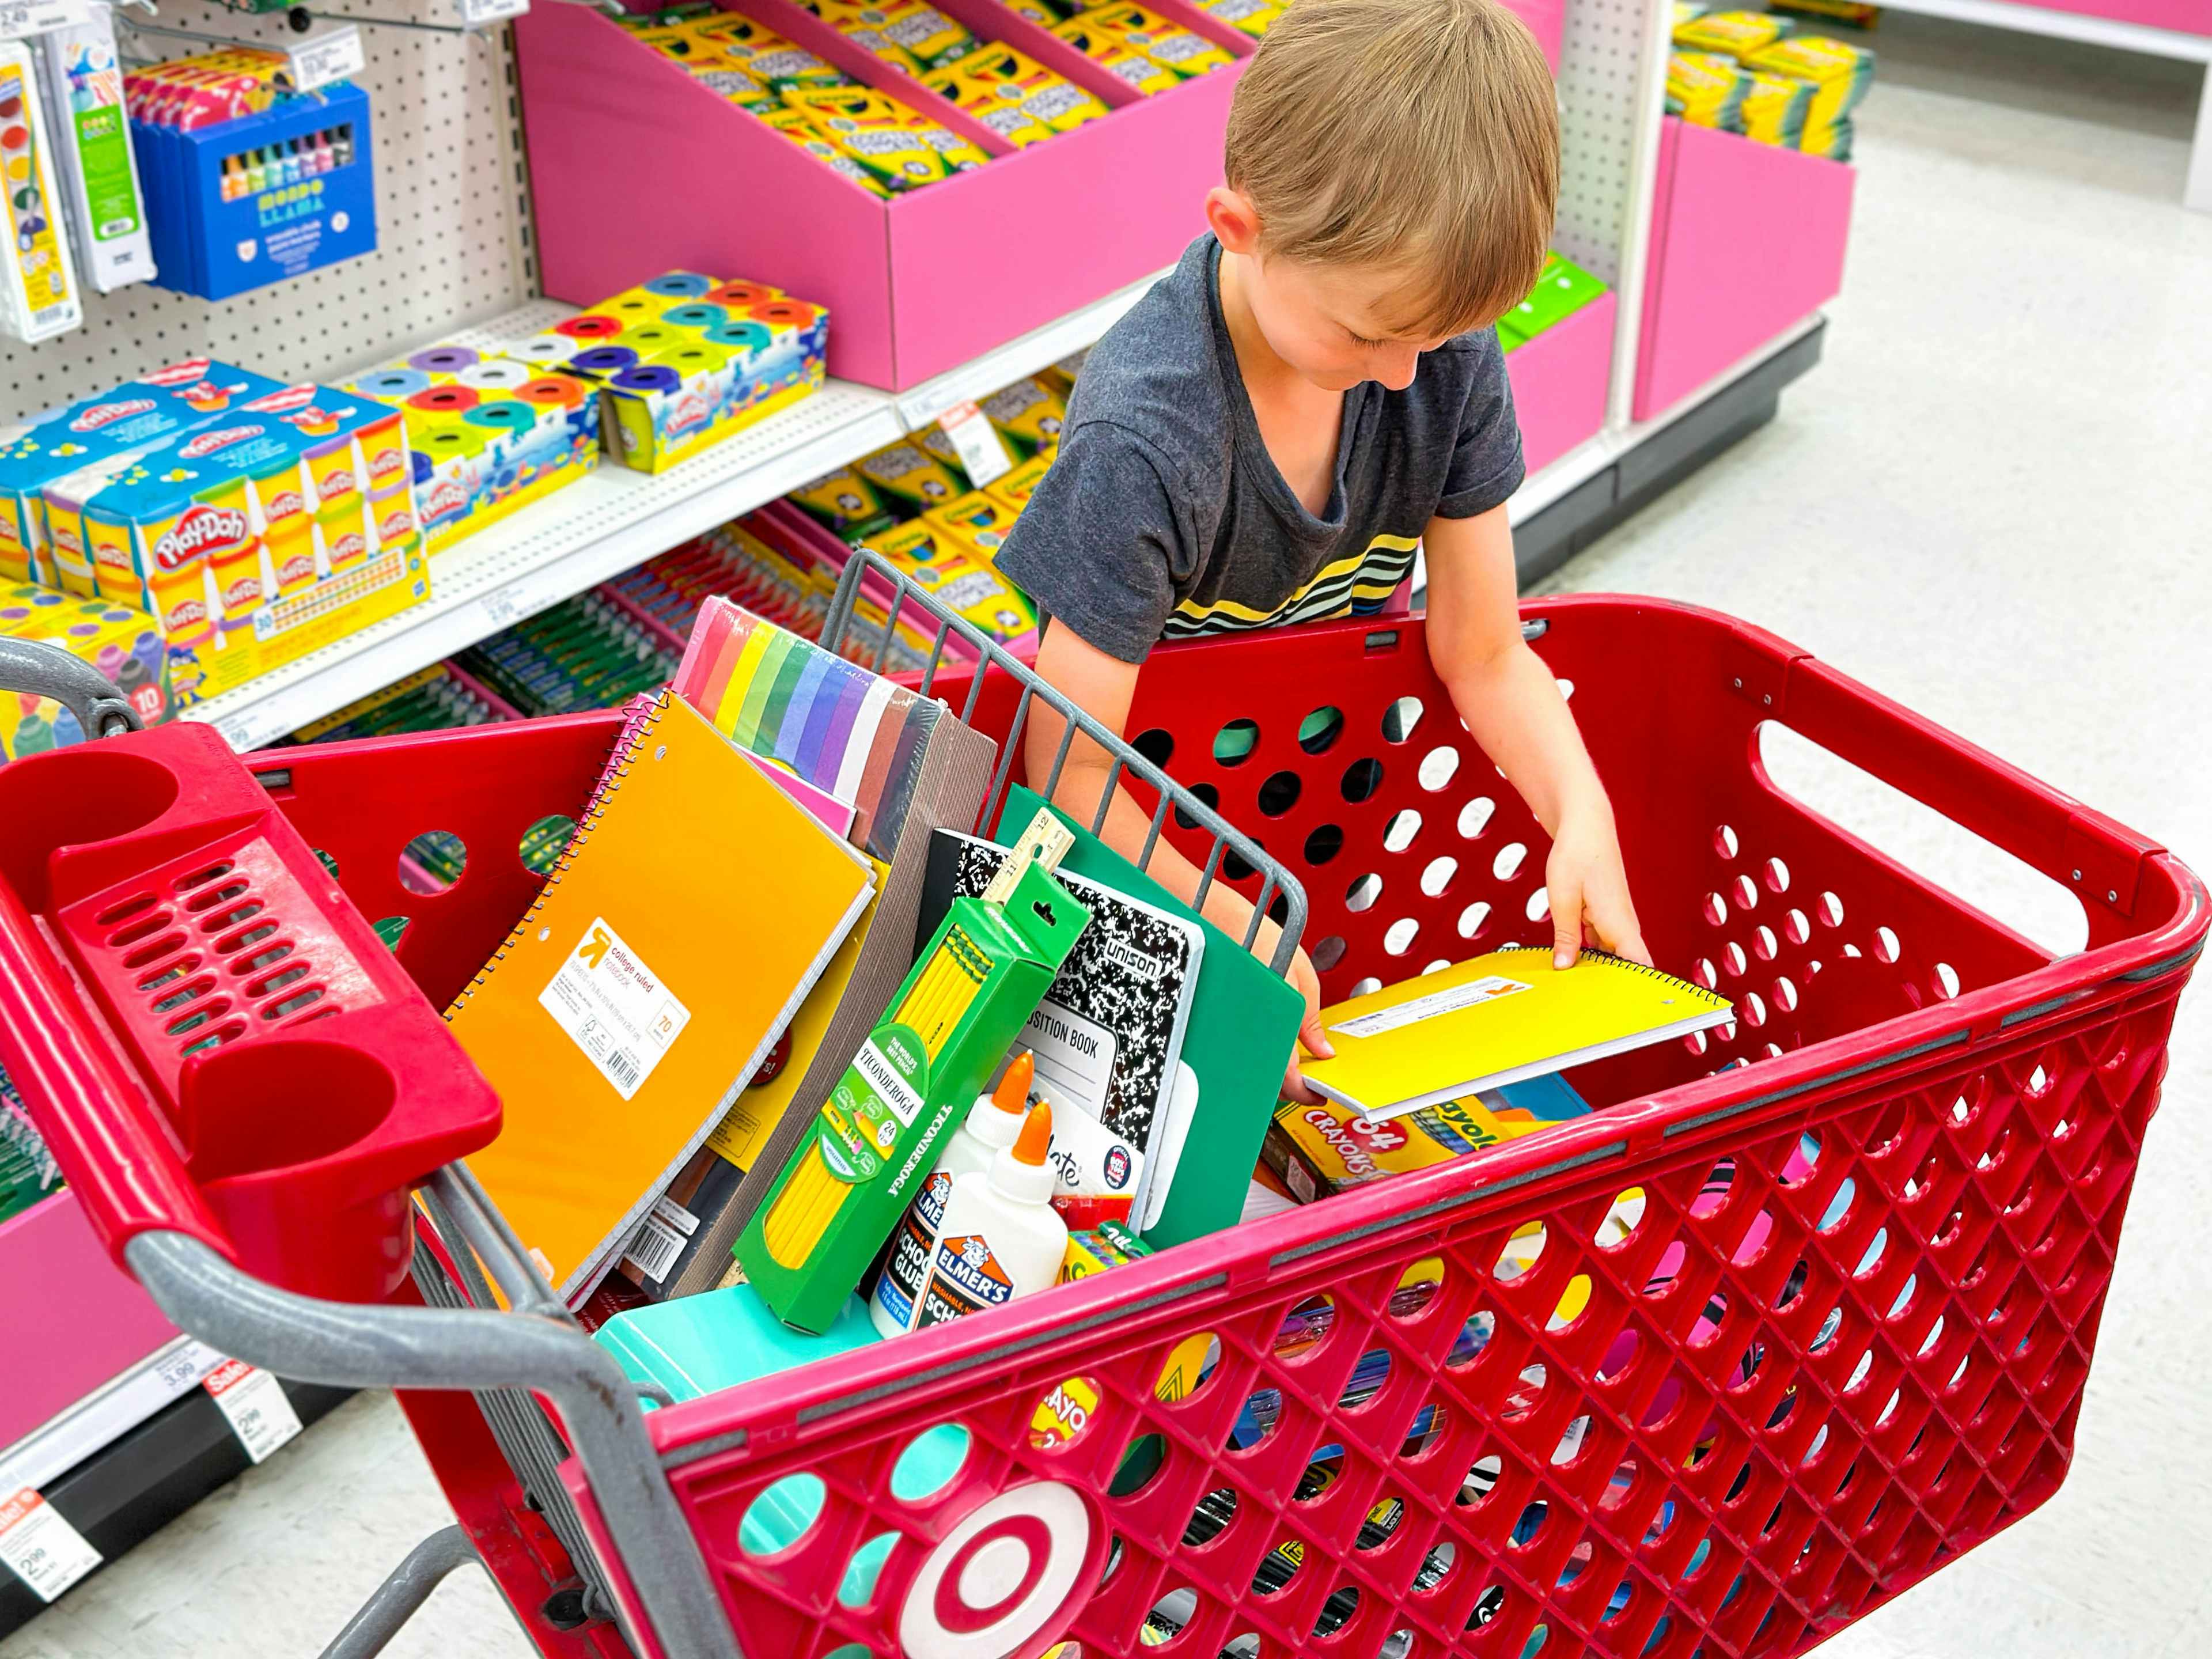 target-back-to-school-supplies-kcl-12